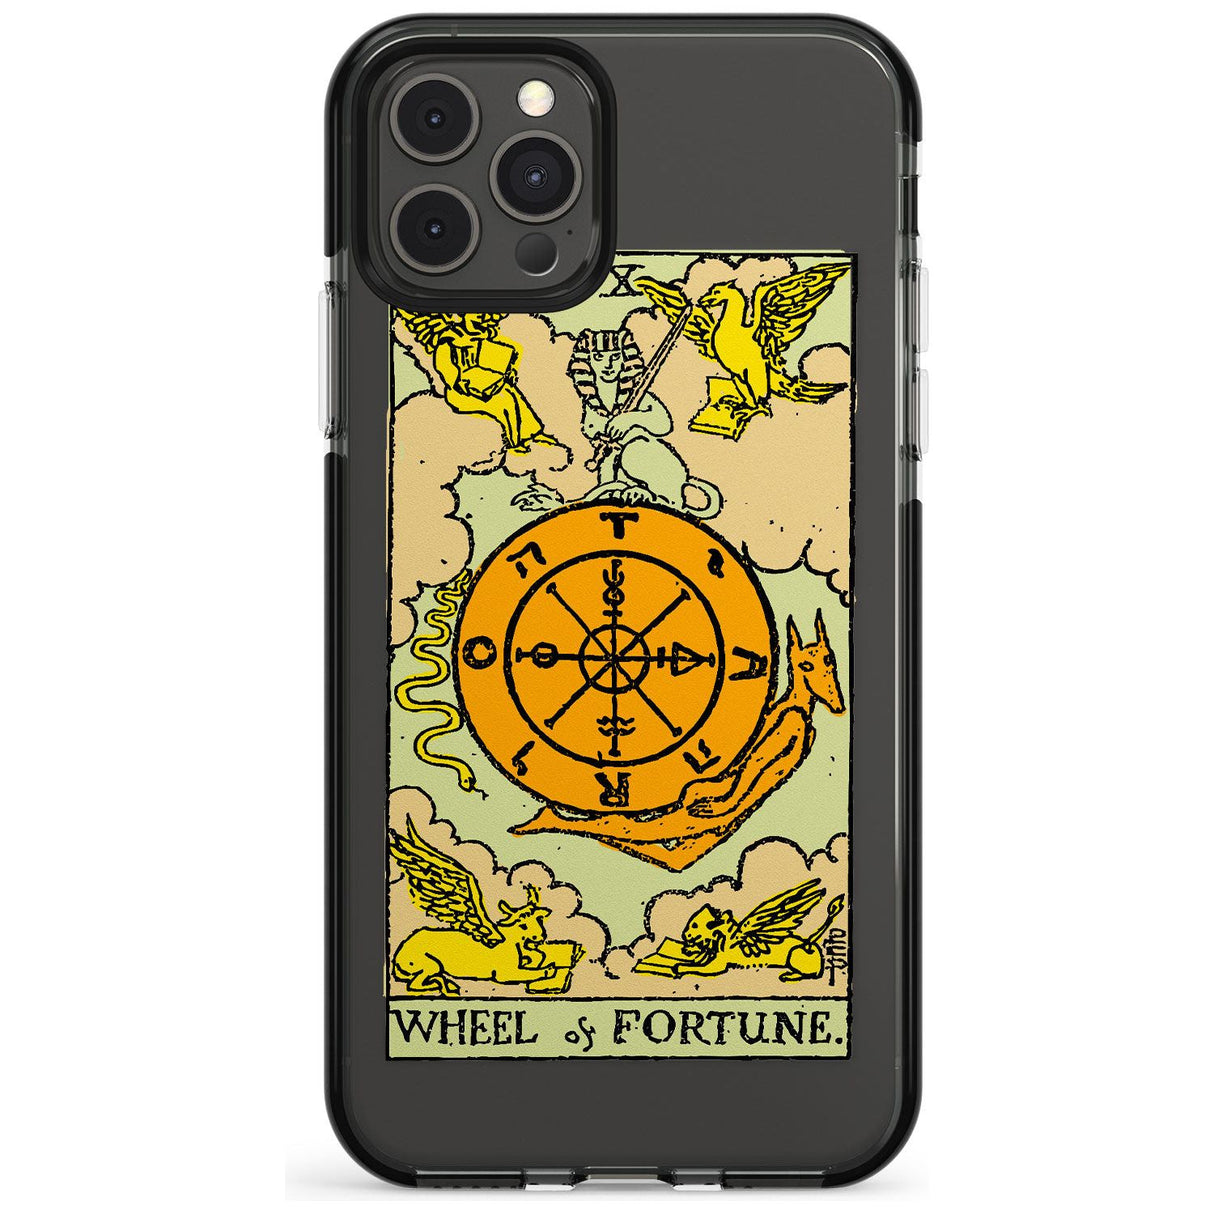 Wheel of Fortune Tarot Card - Colour Pink Fade Impact Phone Case for iPhone 11